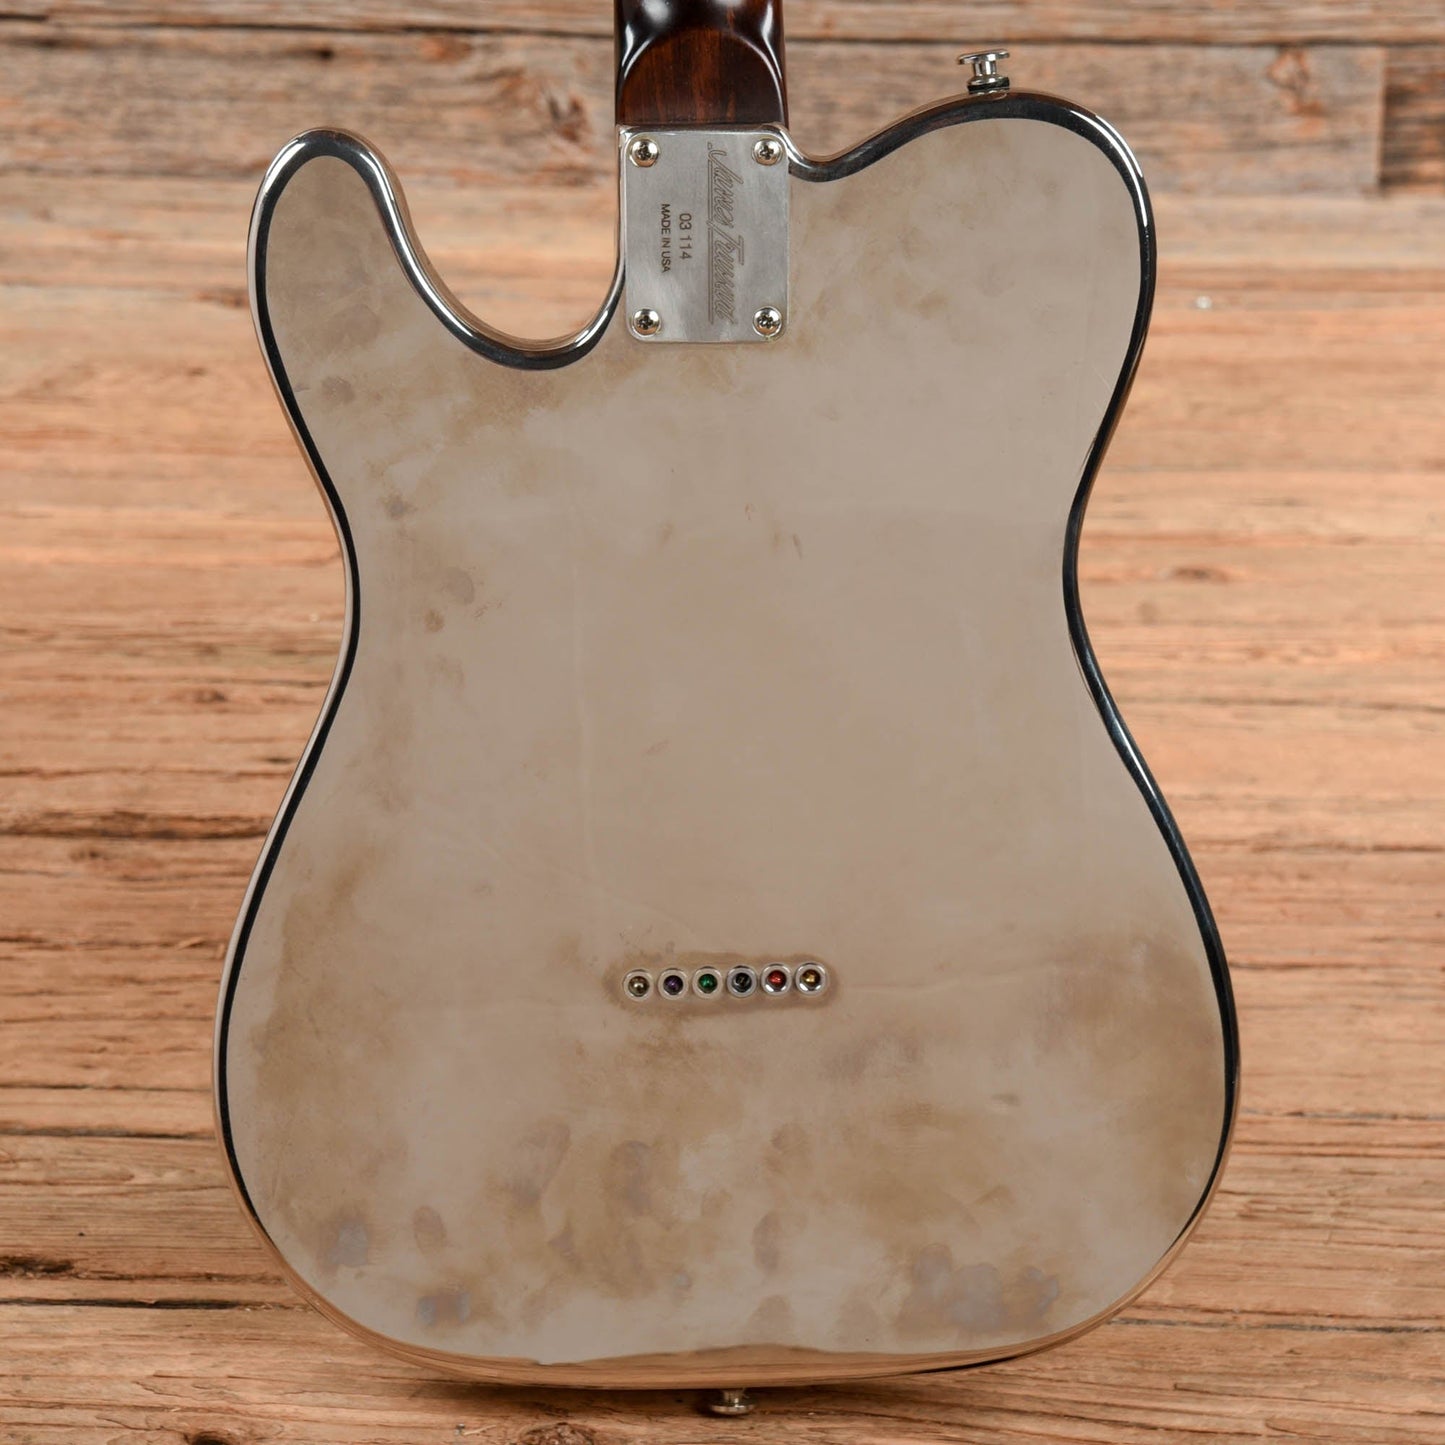 James Trussart Steelcaster Electric Guitars / Solid Body